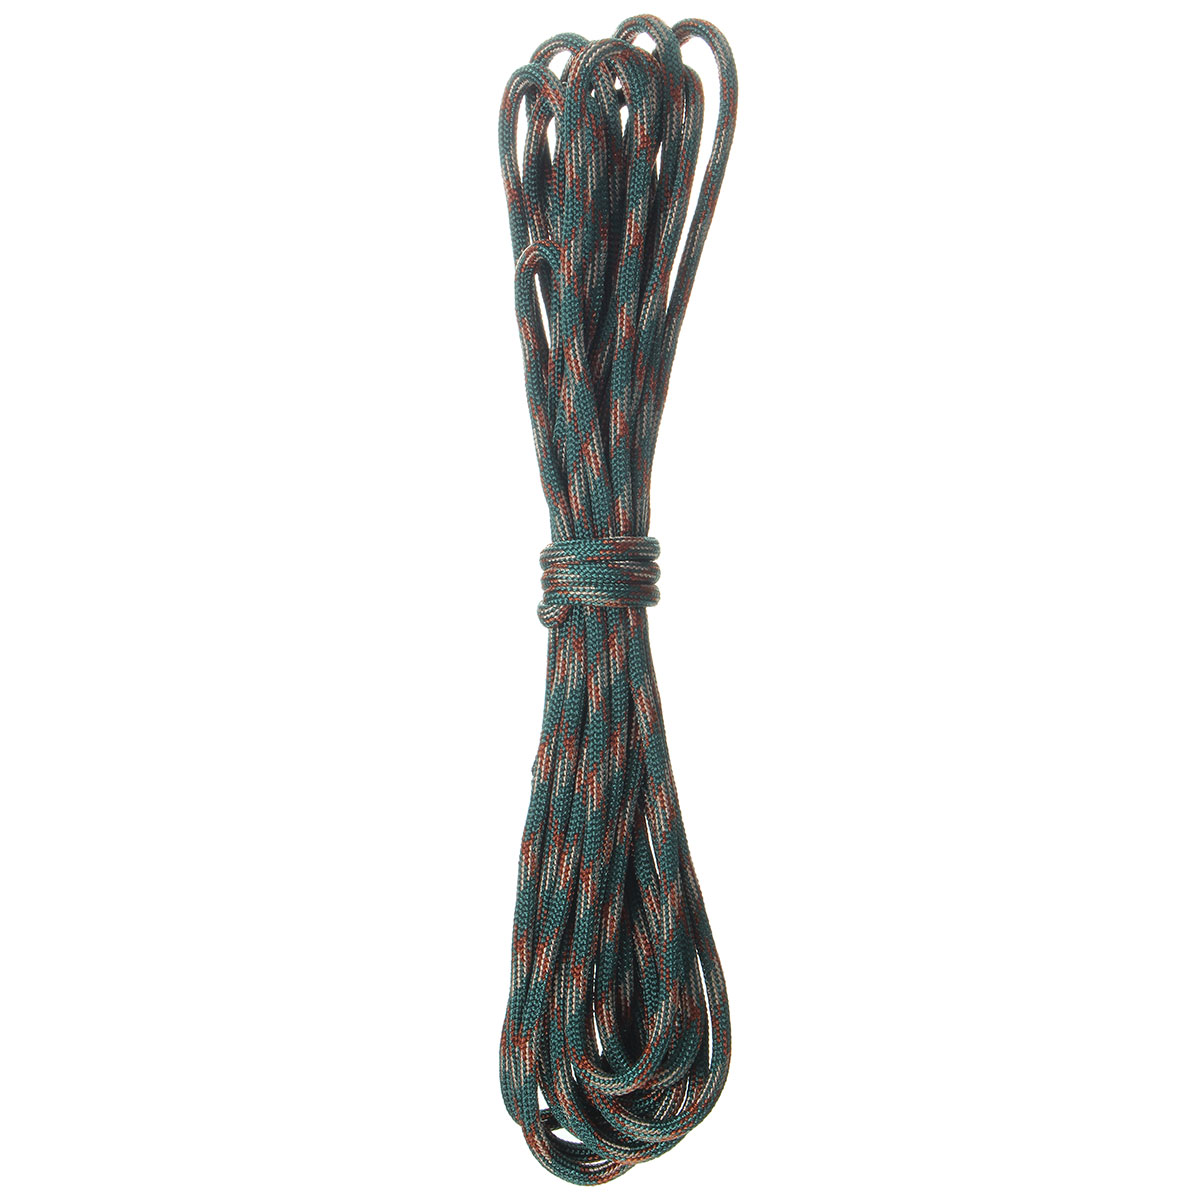 15ft-5m-7-Inner-Strand-505-550-Mil-Survival-Paracord-Bushcraft-Survival-Cord-Lanyard-Rope-Type-III-1349688-3